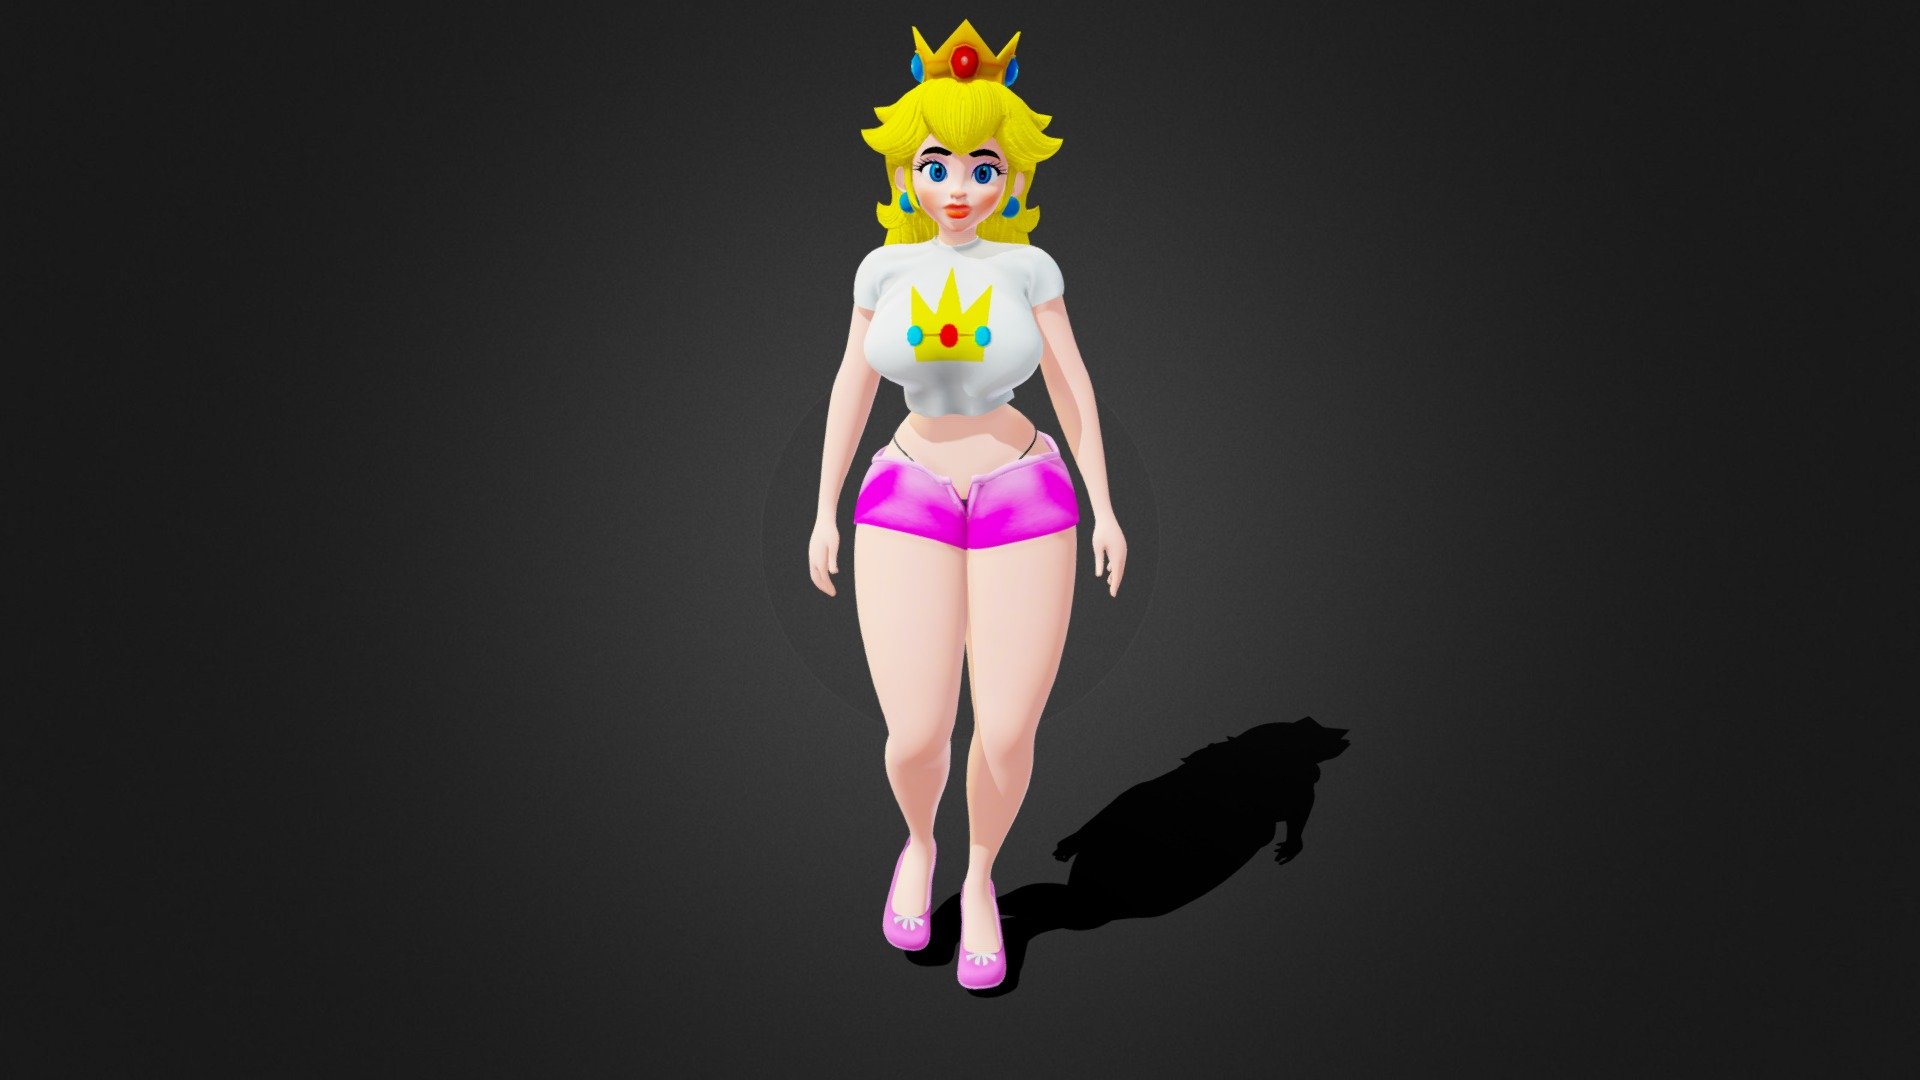 I saw the Super Mario Bros movie and loved it. Peach was a girl boss and I enjoyed seeing her kick ass. Let me know what you think.

Check out the pose:
https://sketchfab.com/3d-models/princess-peach-vs-giga-bowser-pose-a78b3045d770481b8c2ac001e6ddeb69 - Princess Peach Casual Attire - Download Free 3D model by Donte_Loves_Art 3d model